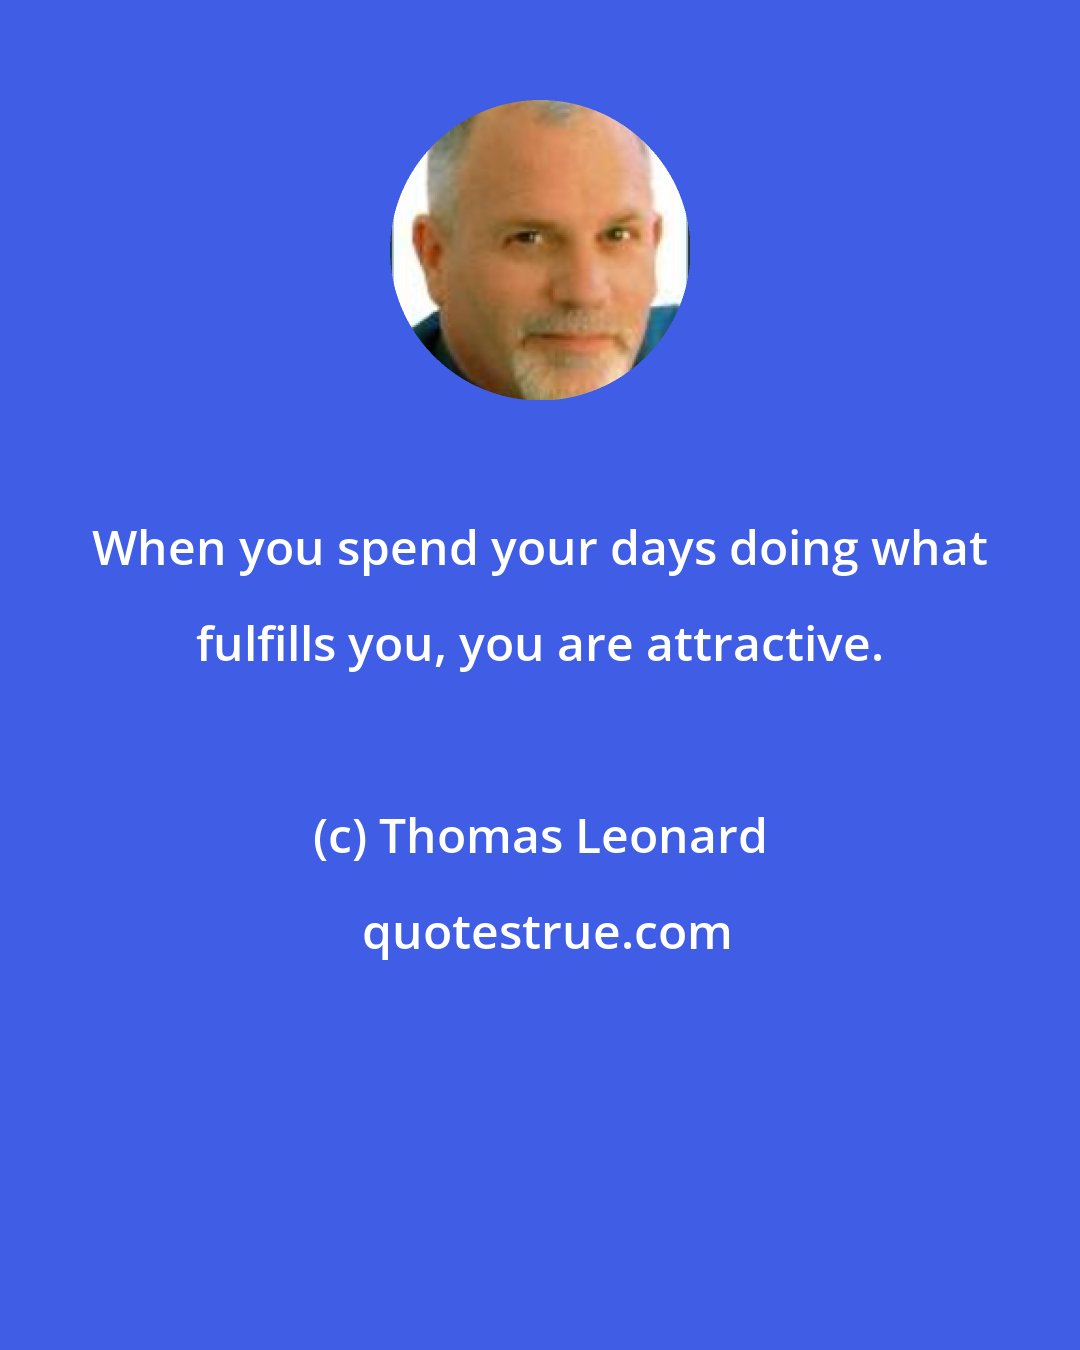 Thomas Leonard: When you spend your days doing what fulfills you, you are attractive.